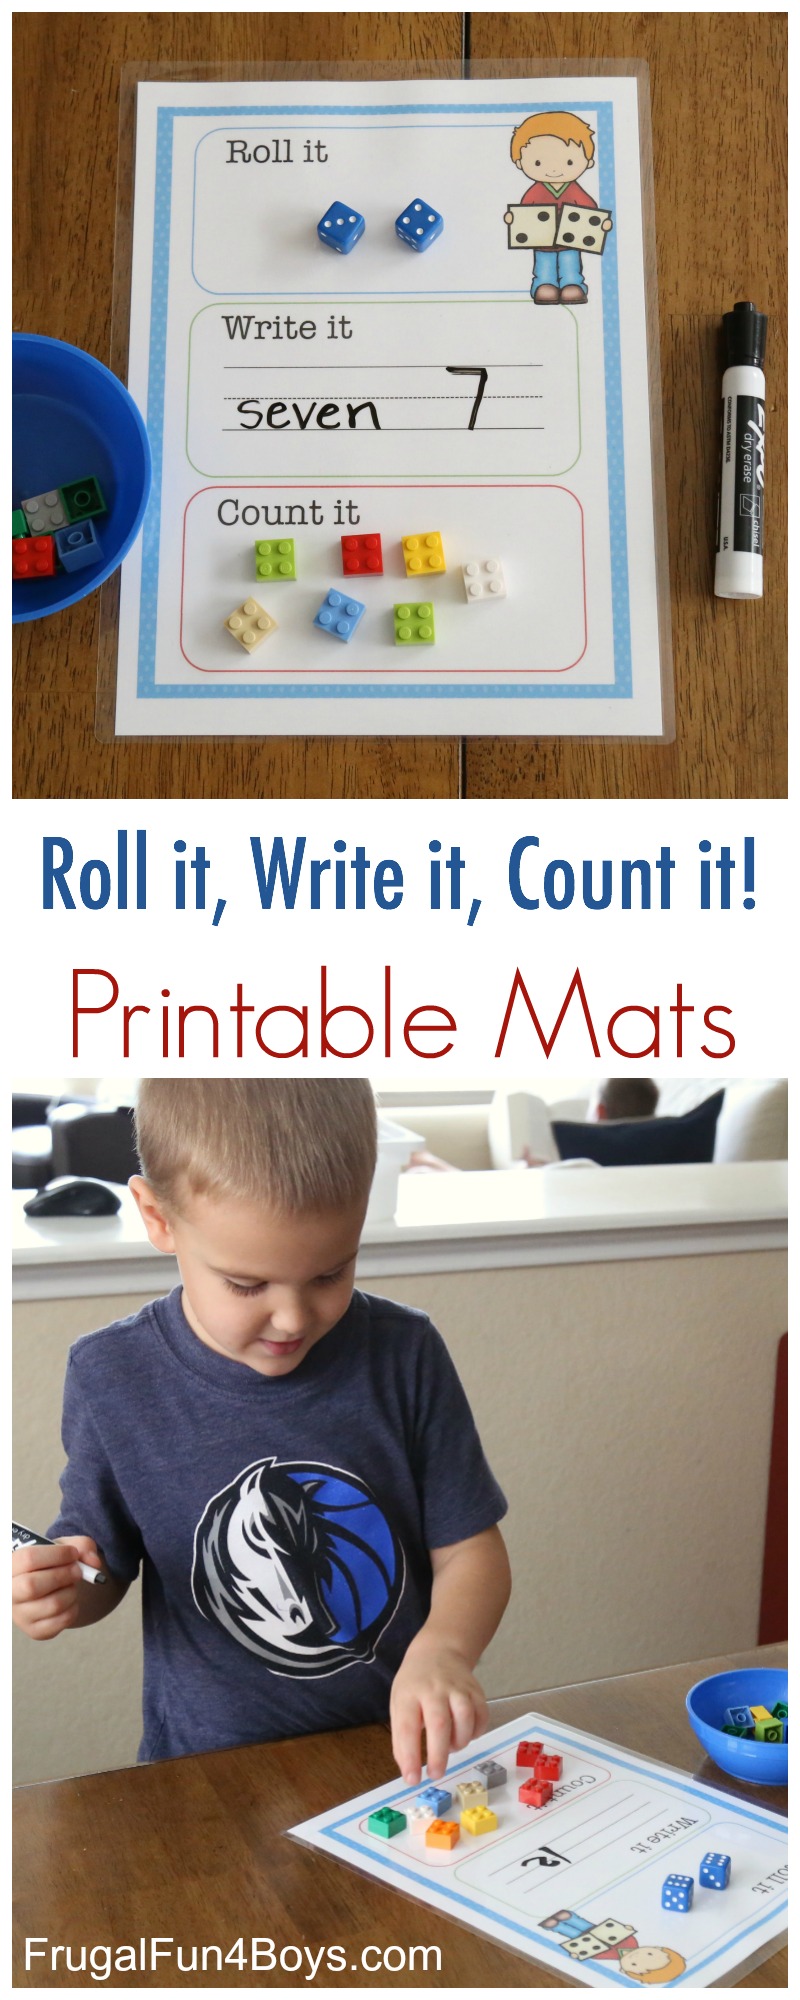 Printable Roll it, Write it, Count it Mats